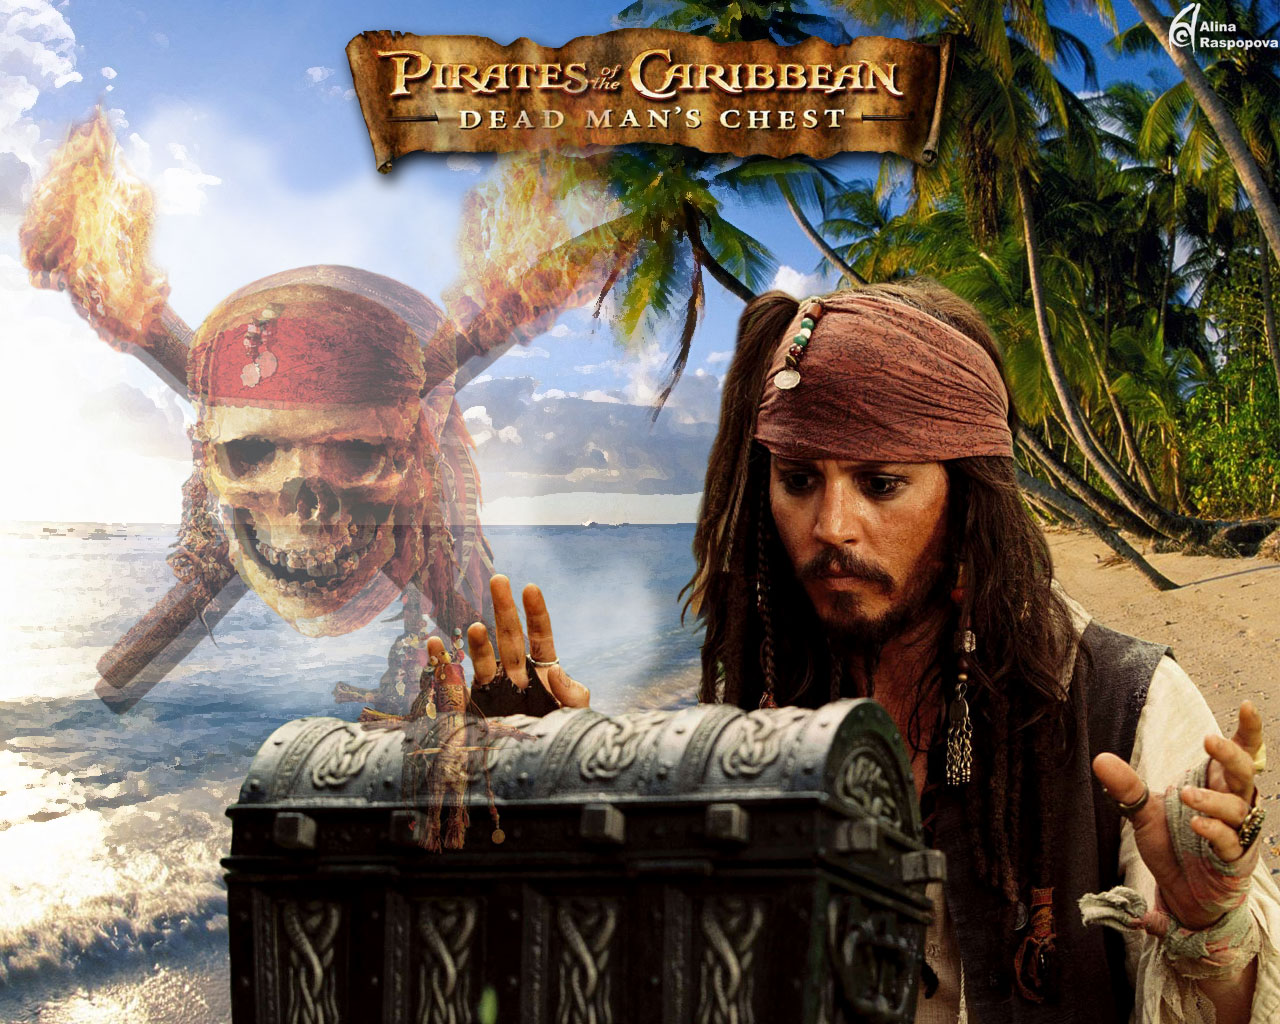 Download full size Pirates Of The Caribbean wallpaper / Movies / 1280x1024